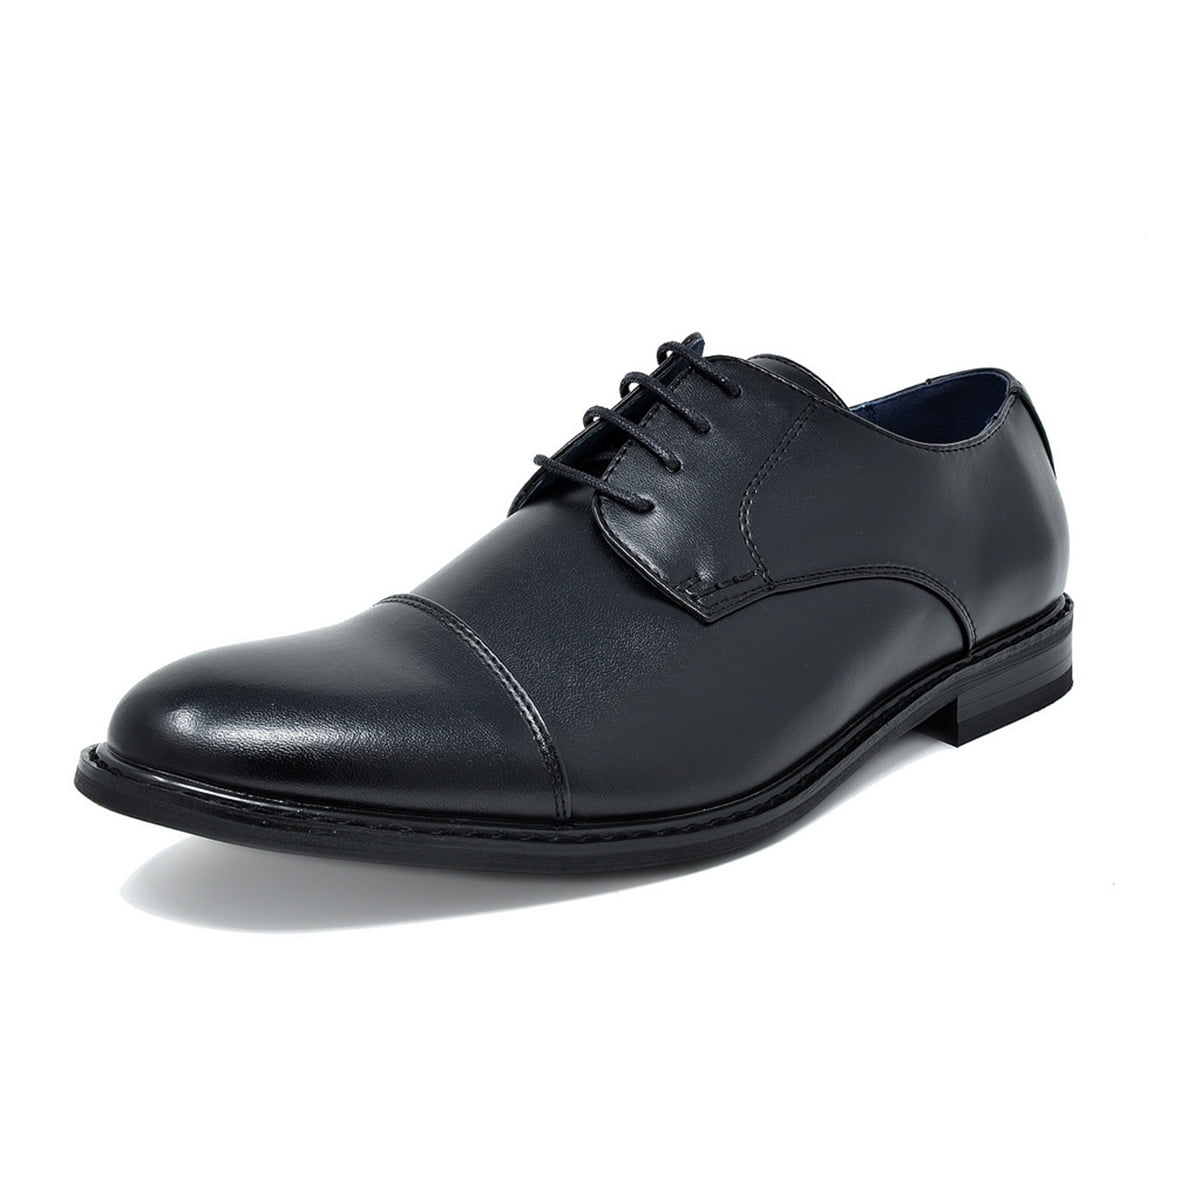 Bruno Marc Men's Dress Shoes Casual Business Oxford 